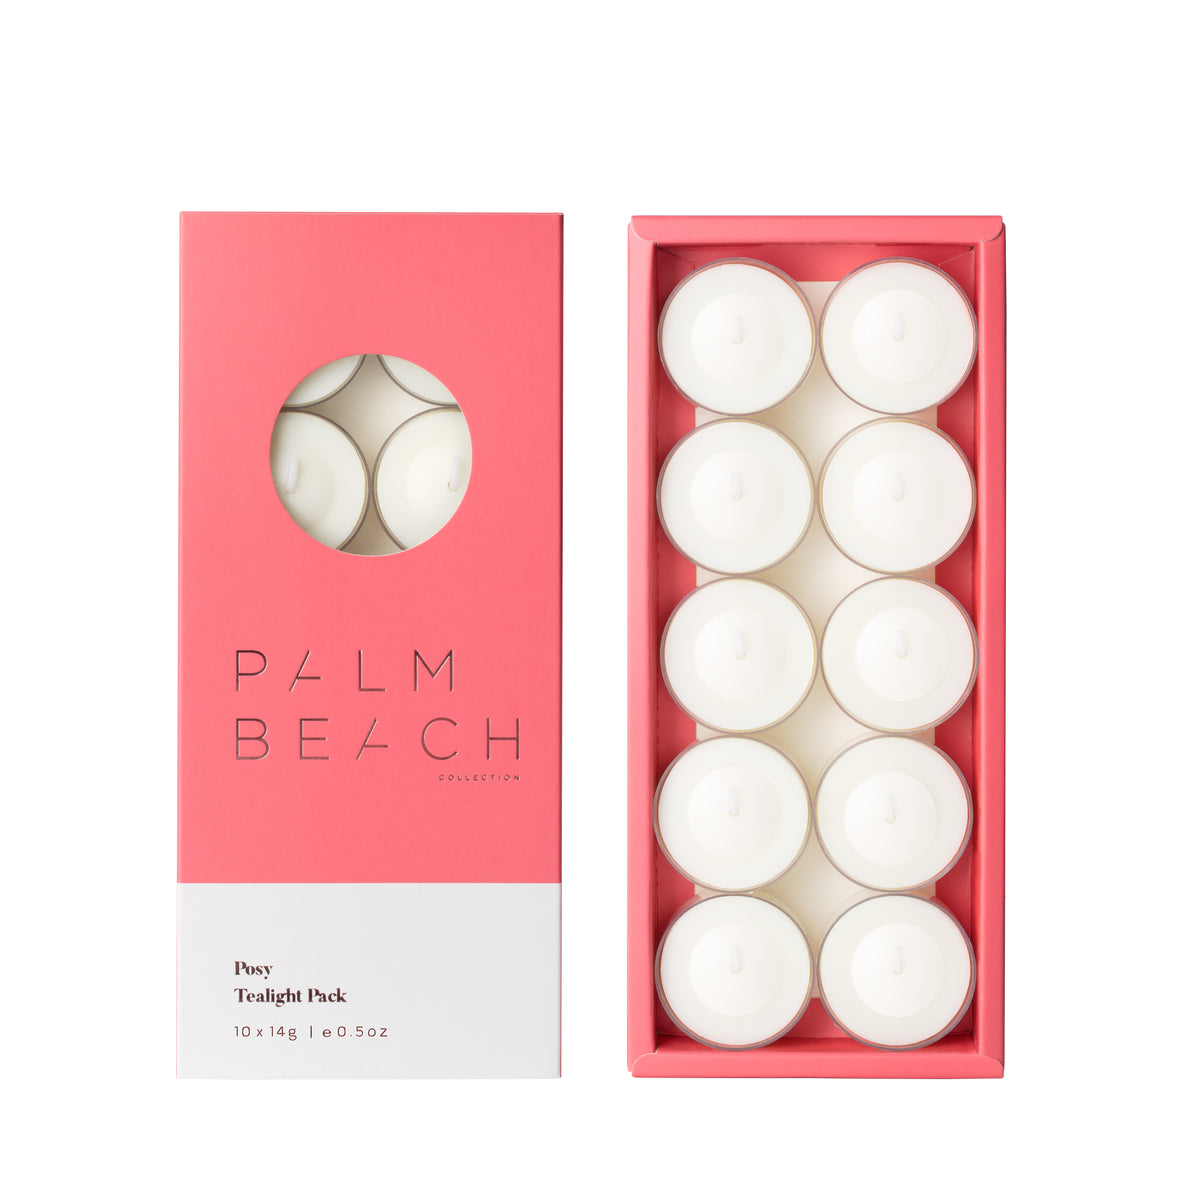 Palm Beach Collection Posy | Tealight Pack 10 x 14g